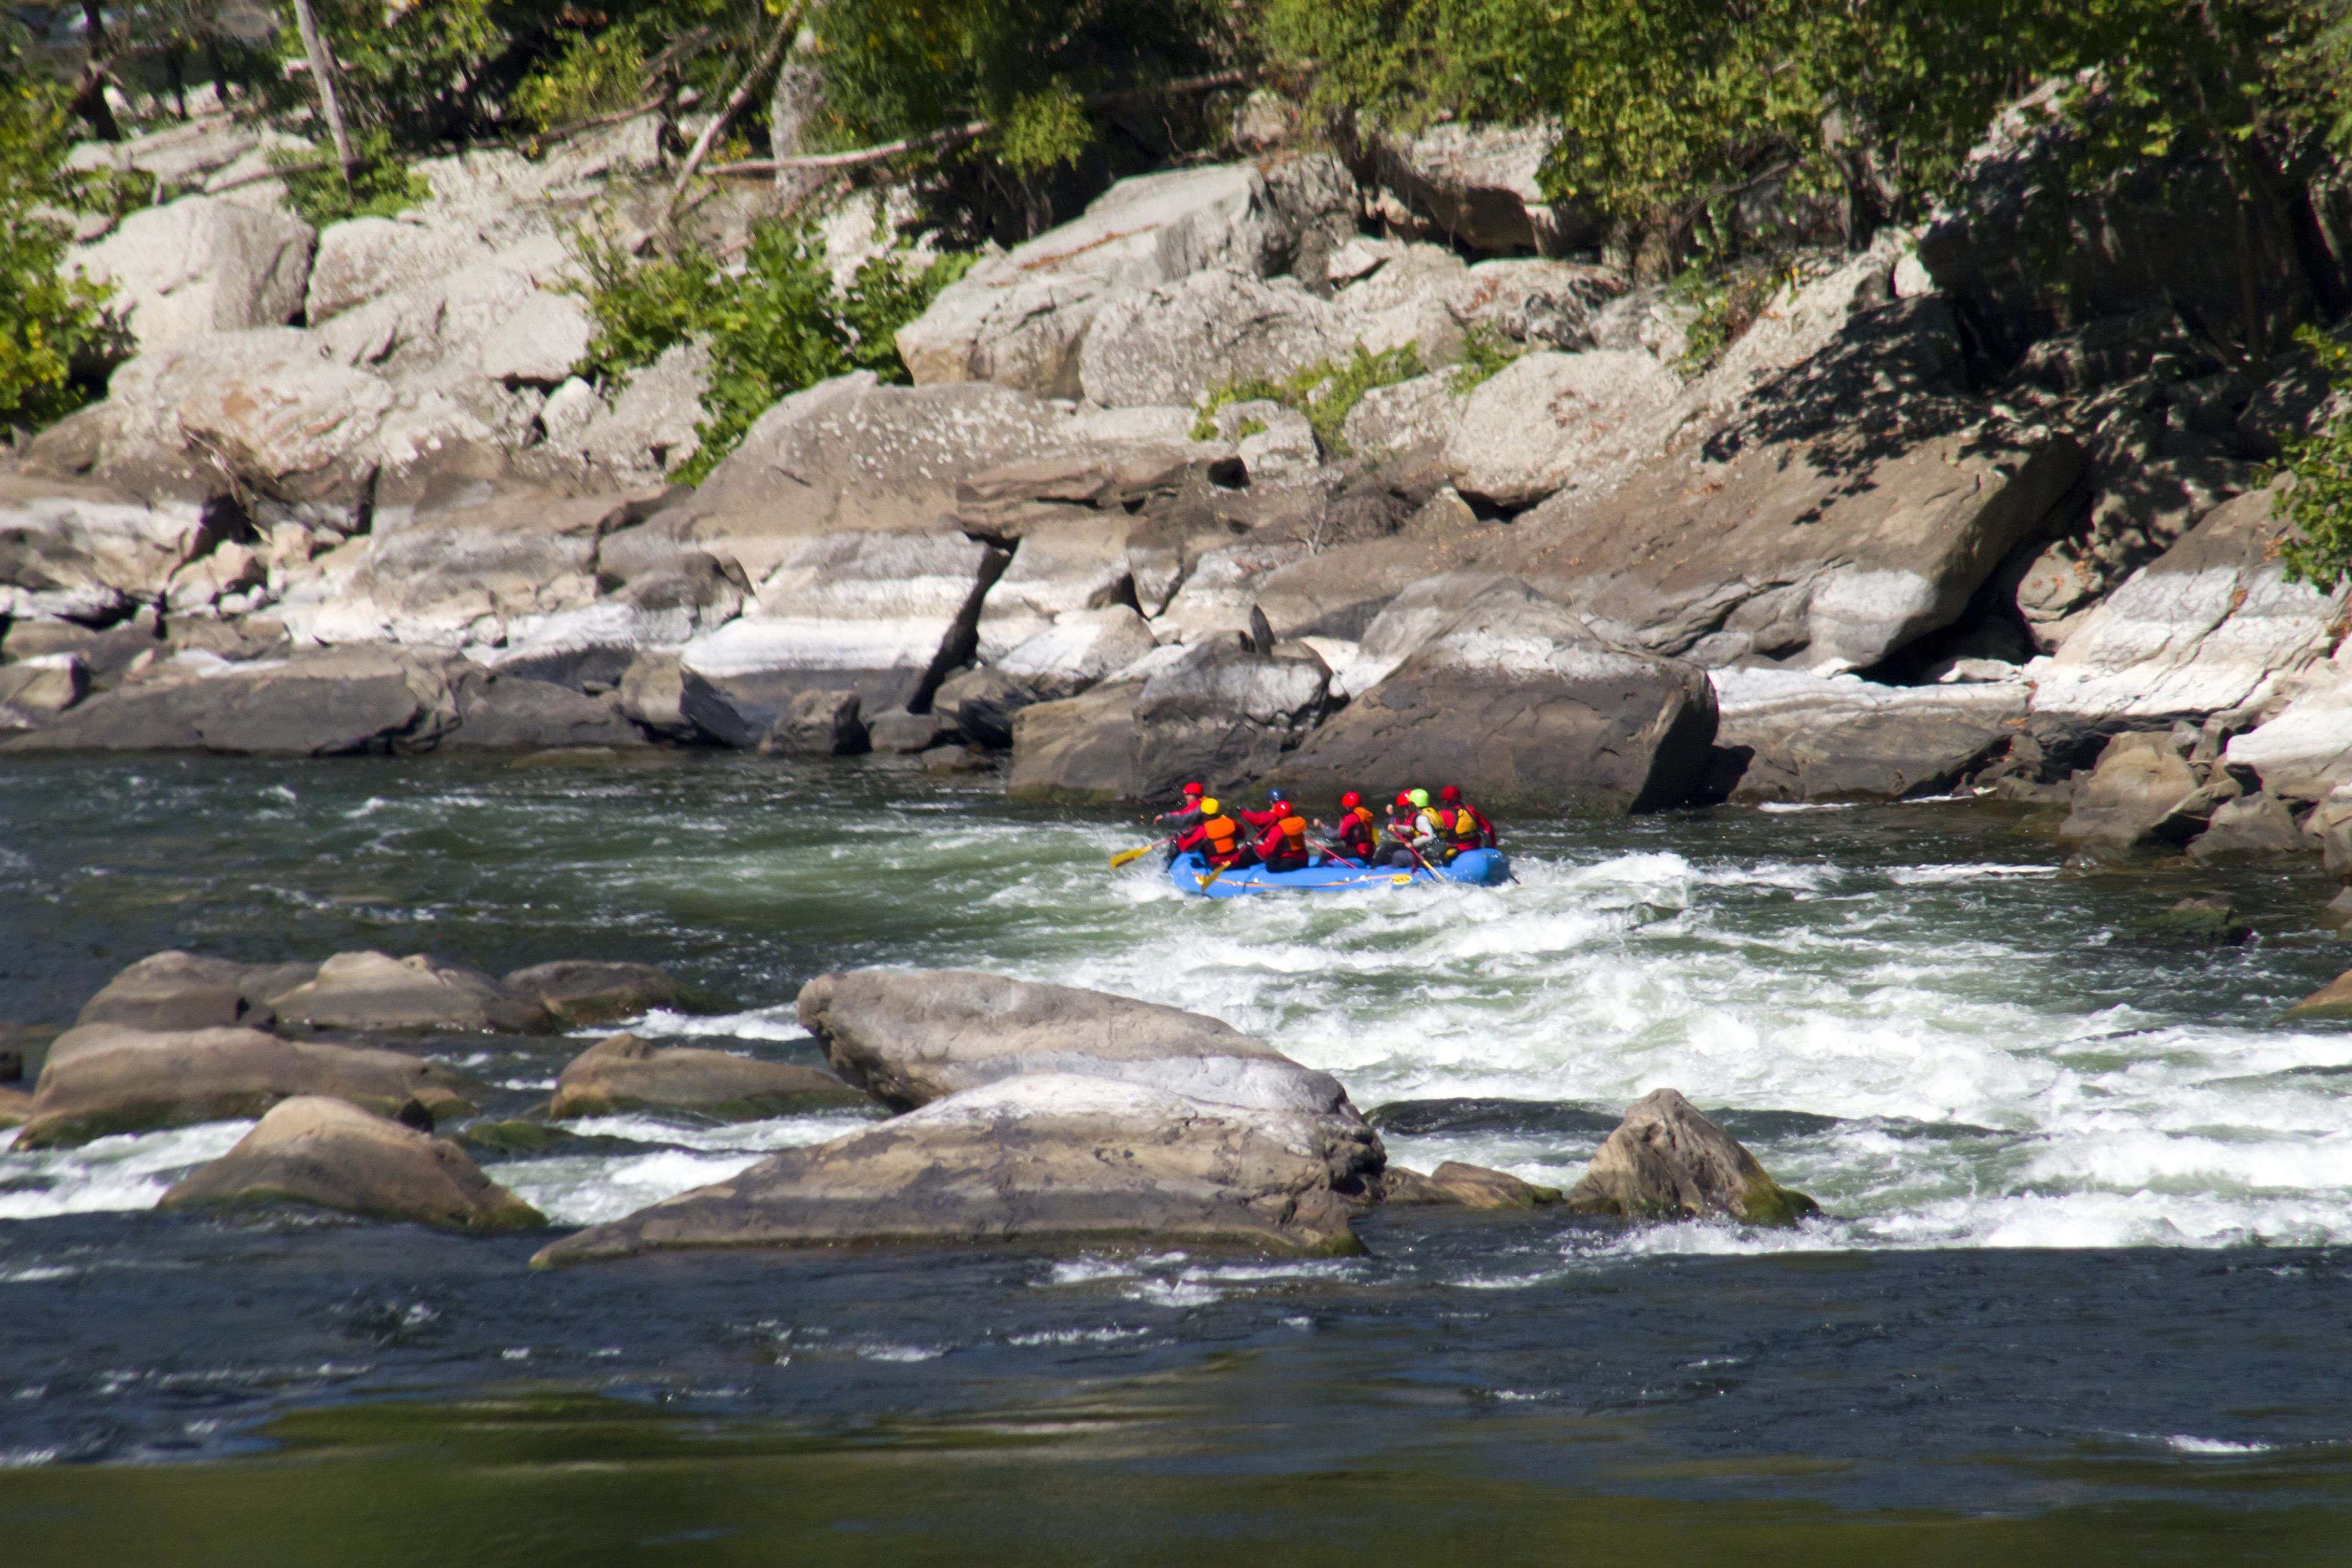 A group rafting on the New River Gorge in West Virginia